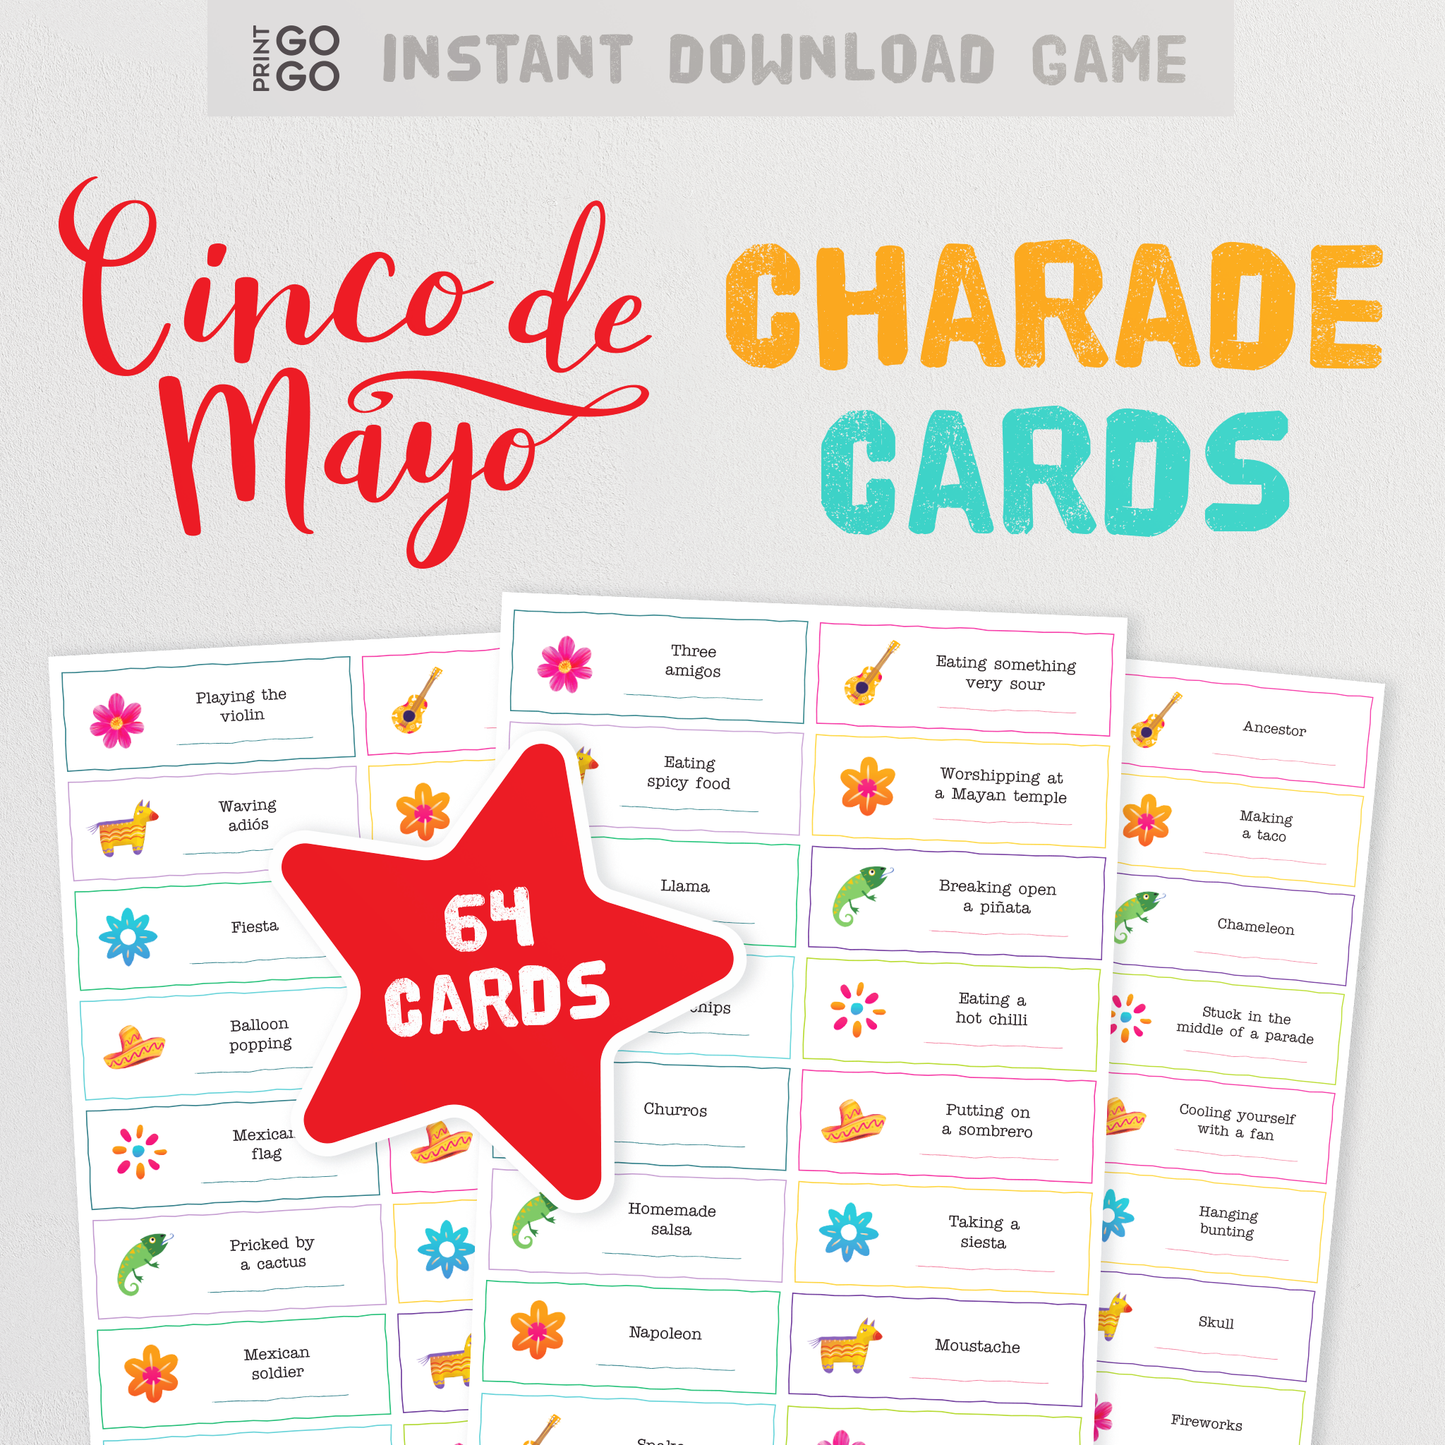 Cinco de Mayo Charades - The Fun Family Party Game of Acting Out and Guessing Phrases